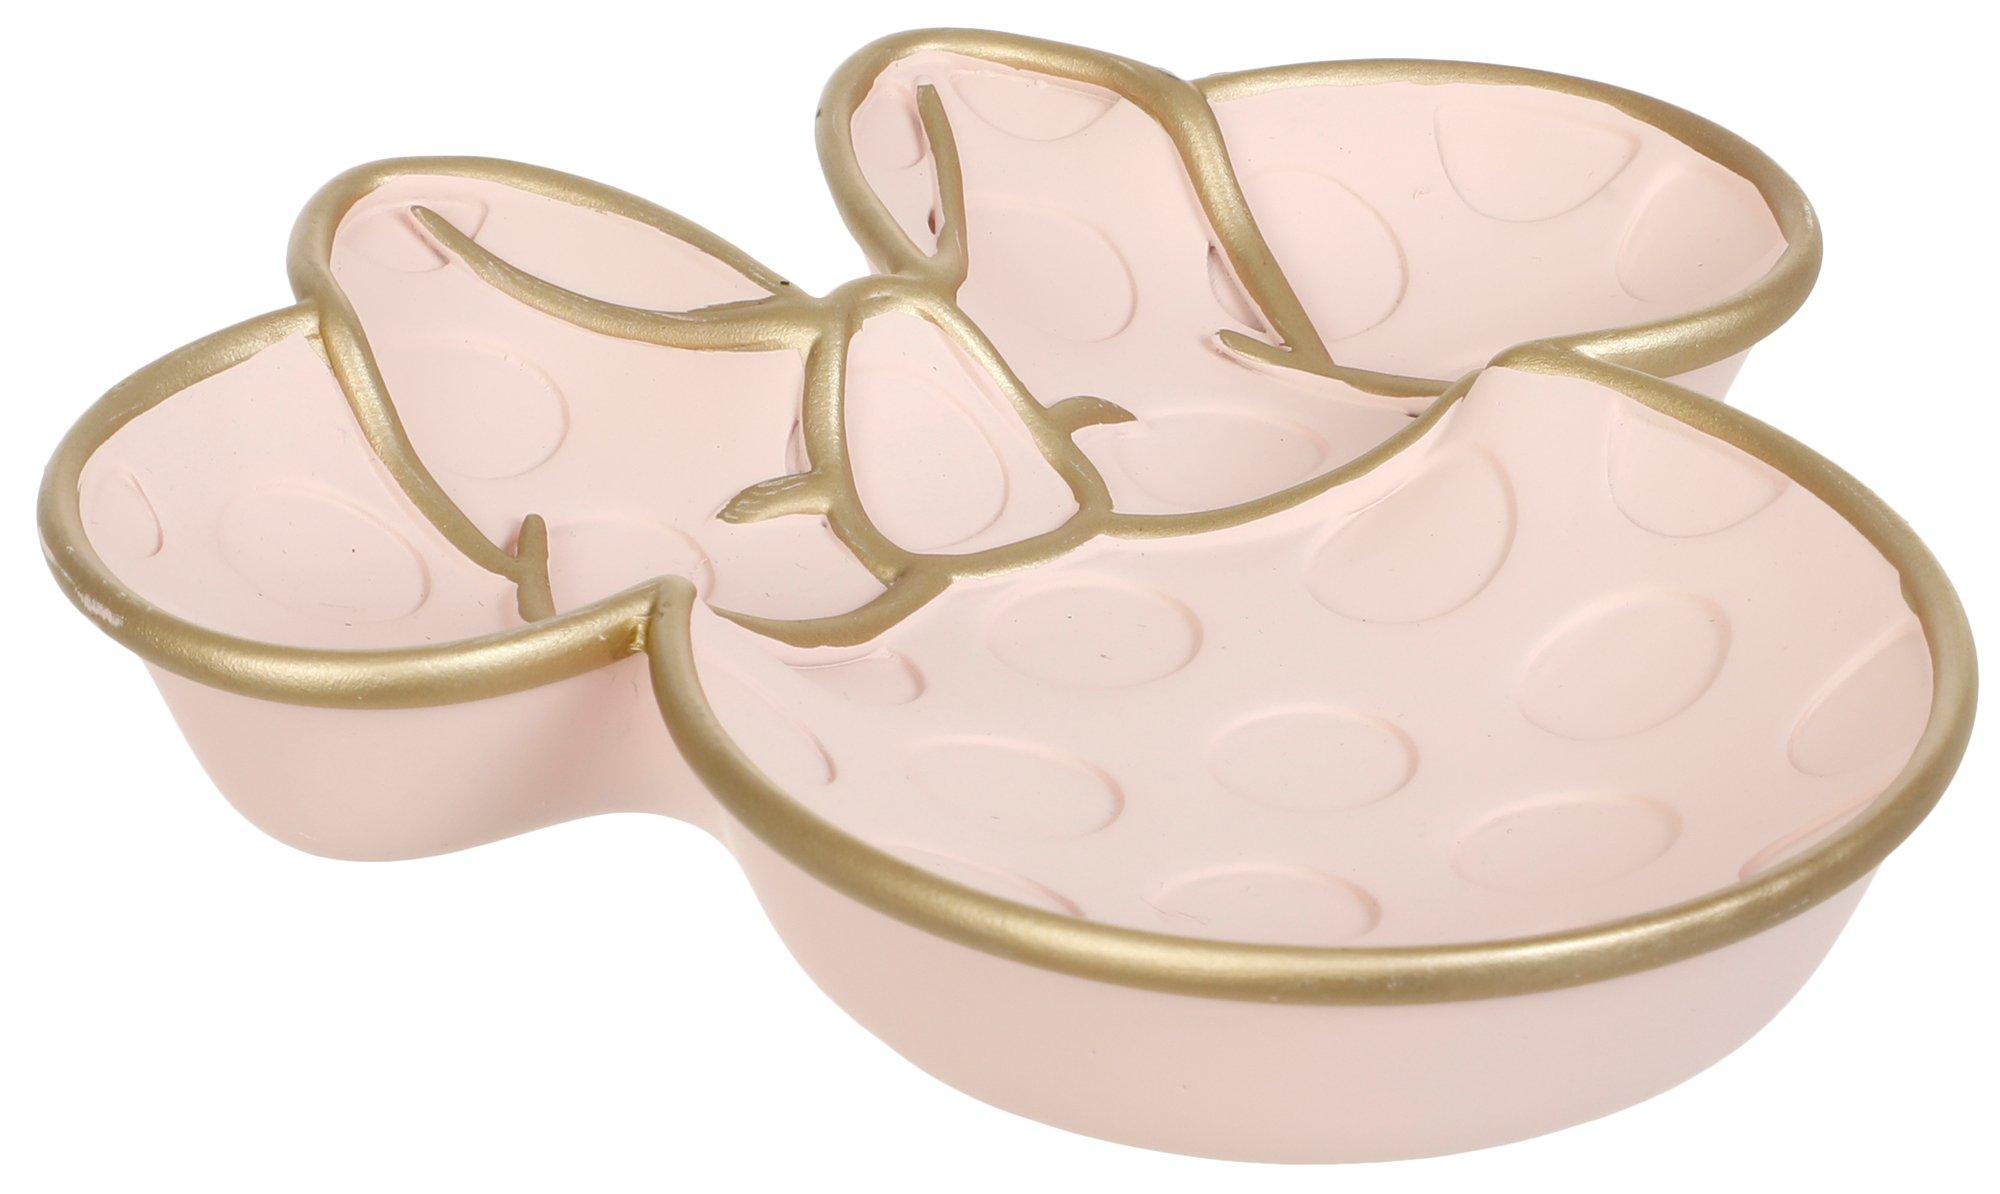 Minnie Mouse Soap Dish